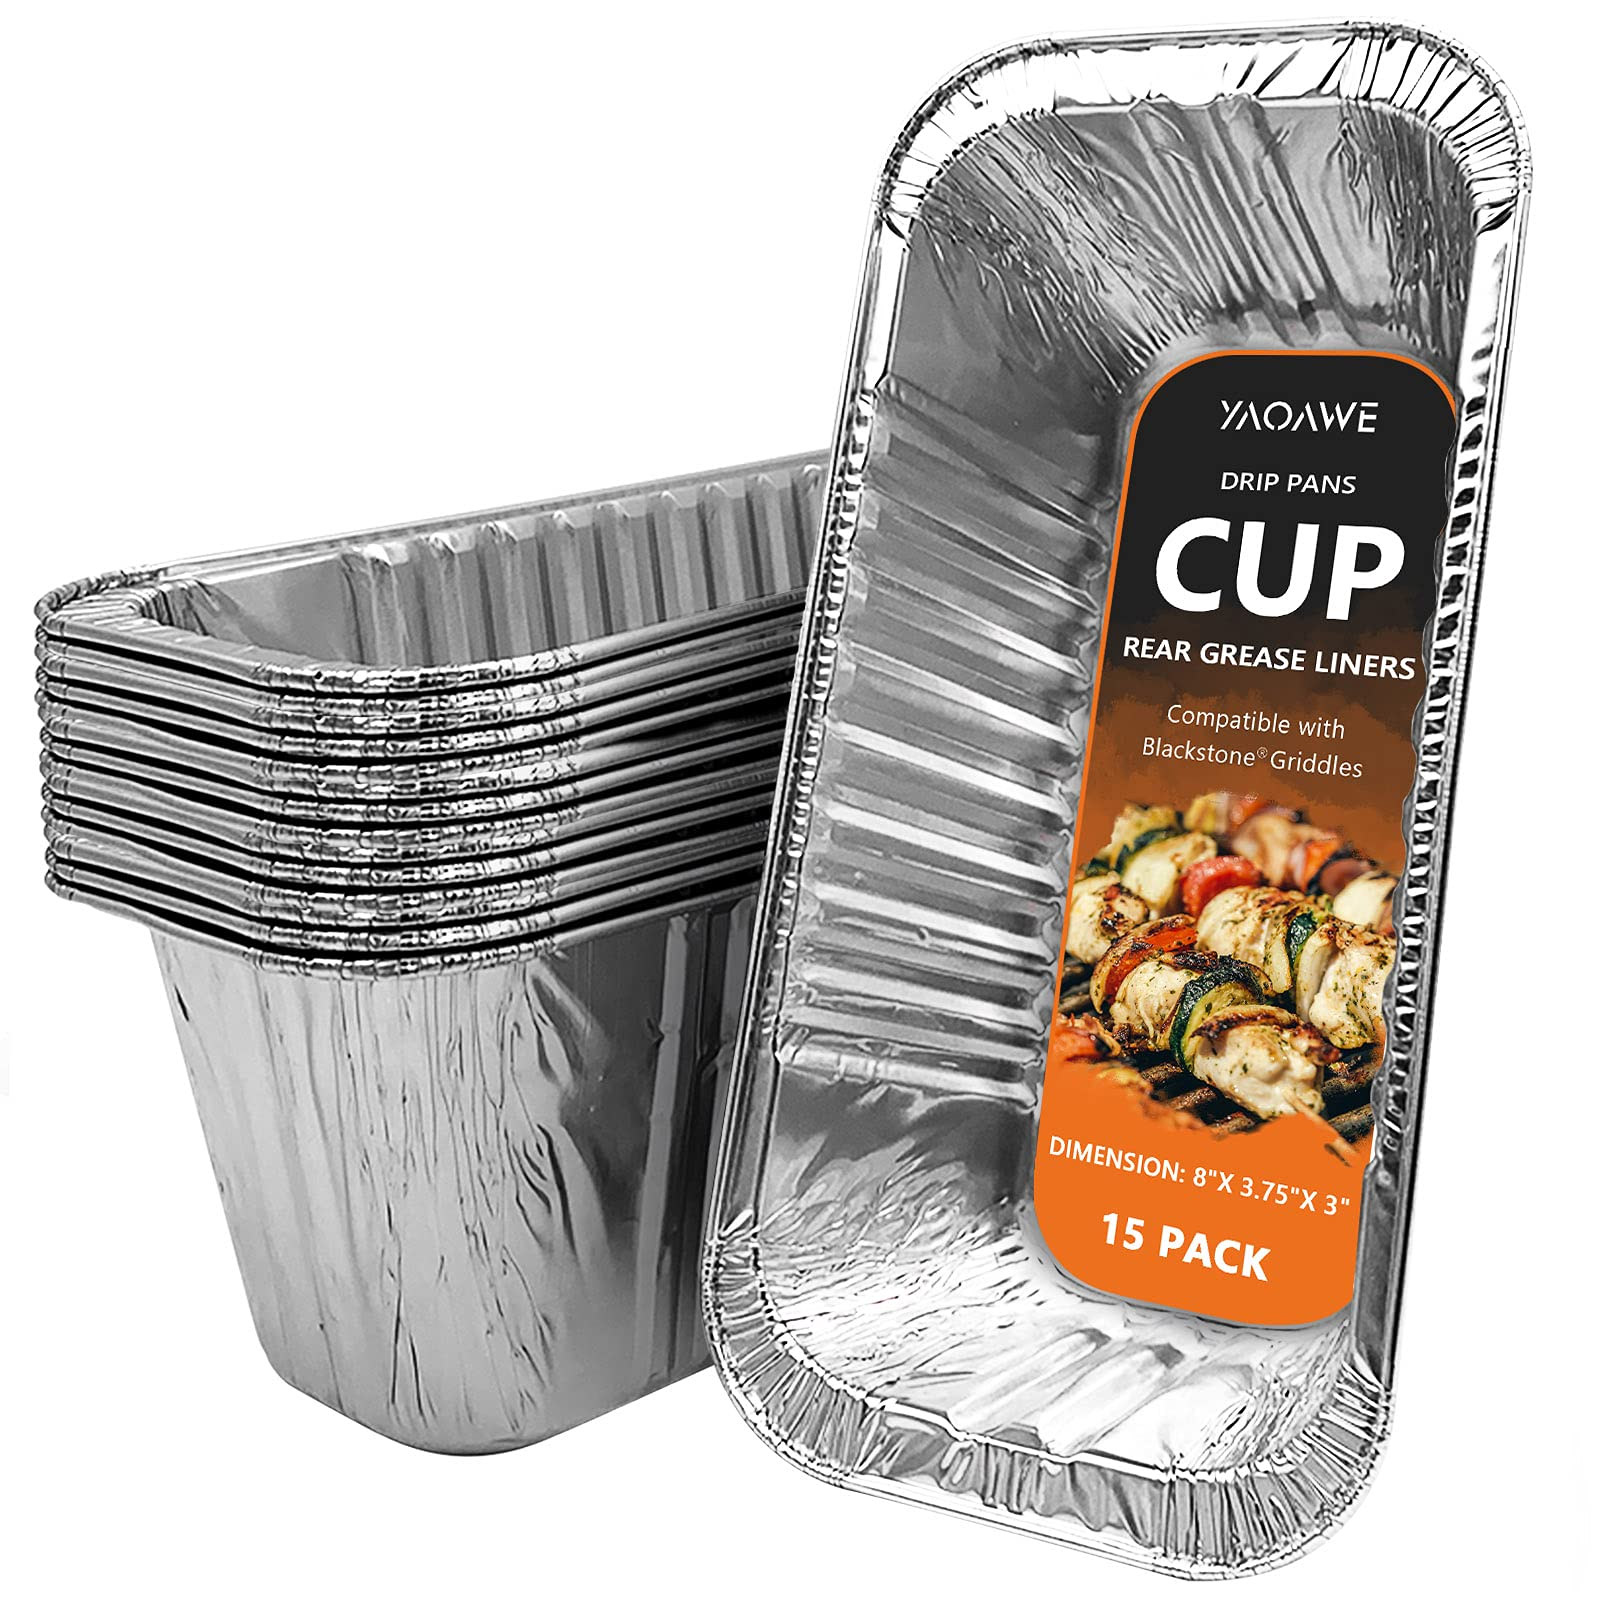 Aluminum Pans Take Out Containers with Lids (50 Pack) 2 lb Disposable Aluminum Foil Oblong Pans with Cardboard Covers - to Go Food Storage Containers